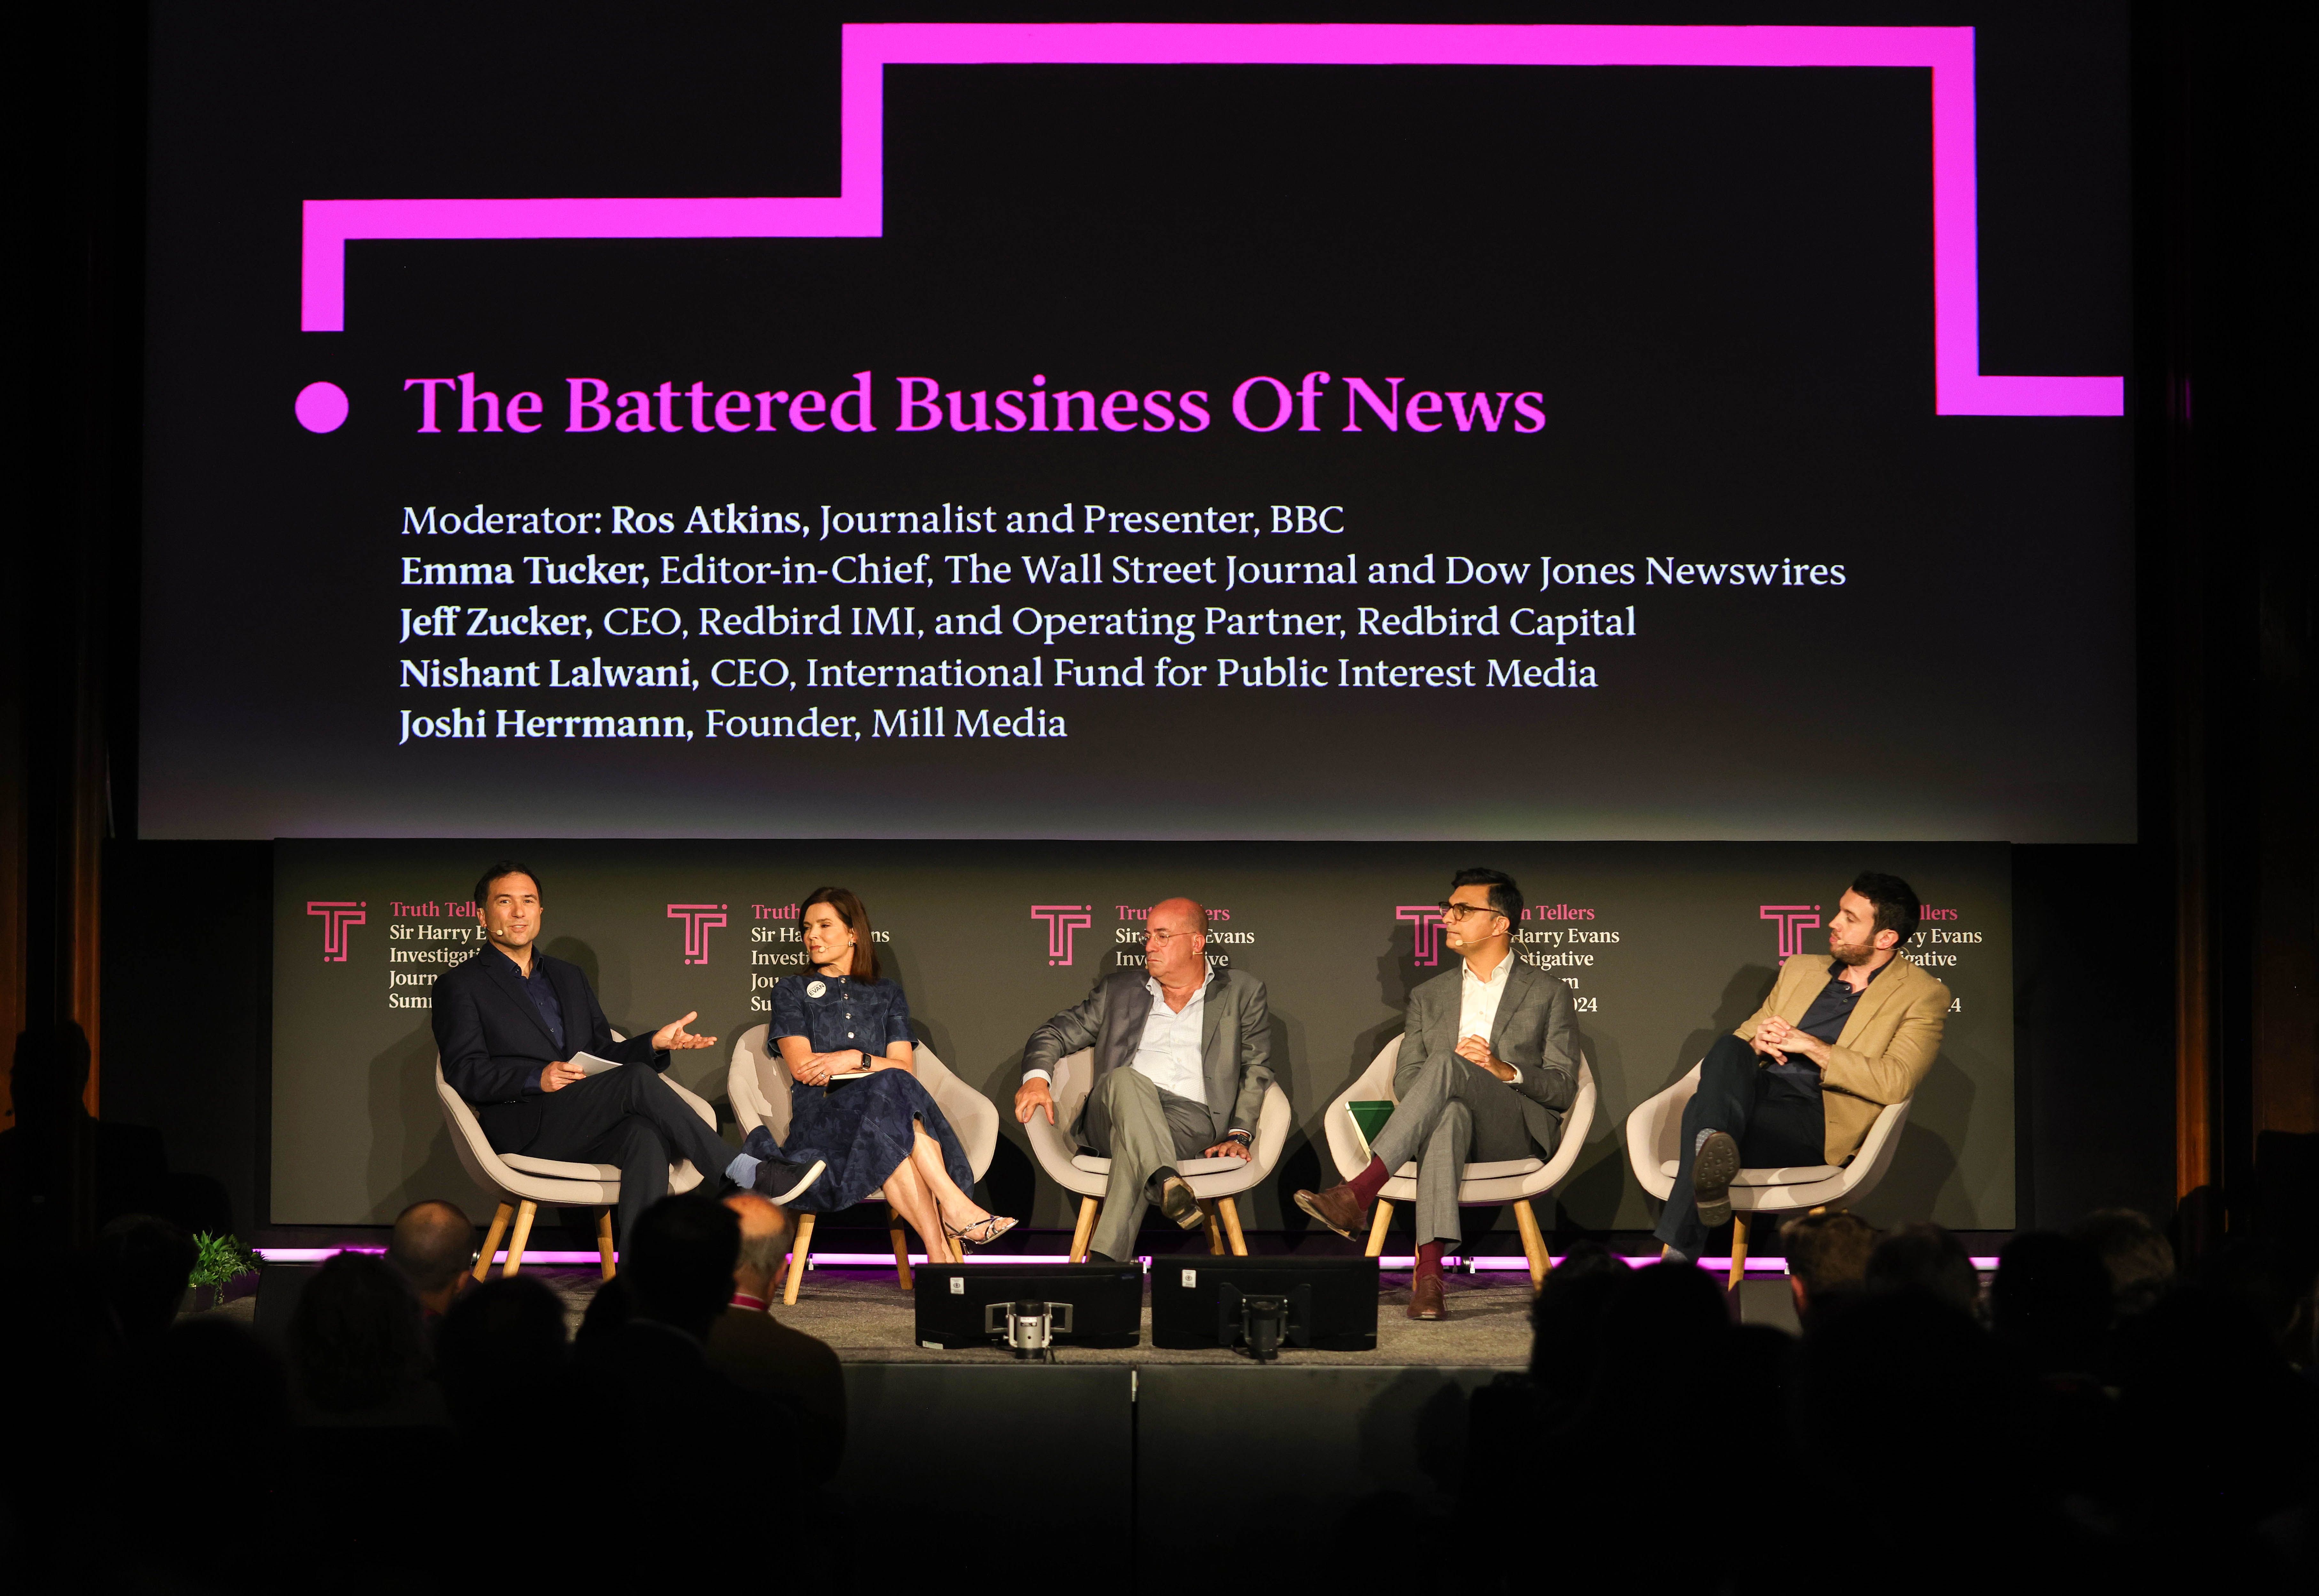 Panel on the Battered Business of News led by Ros Atkins